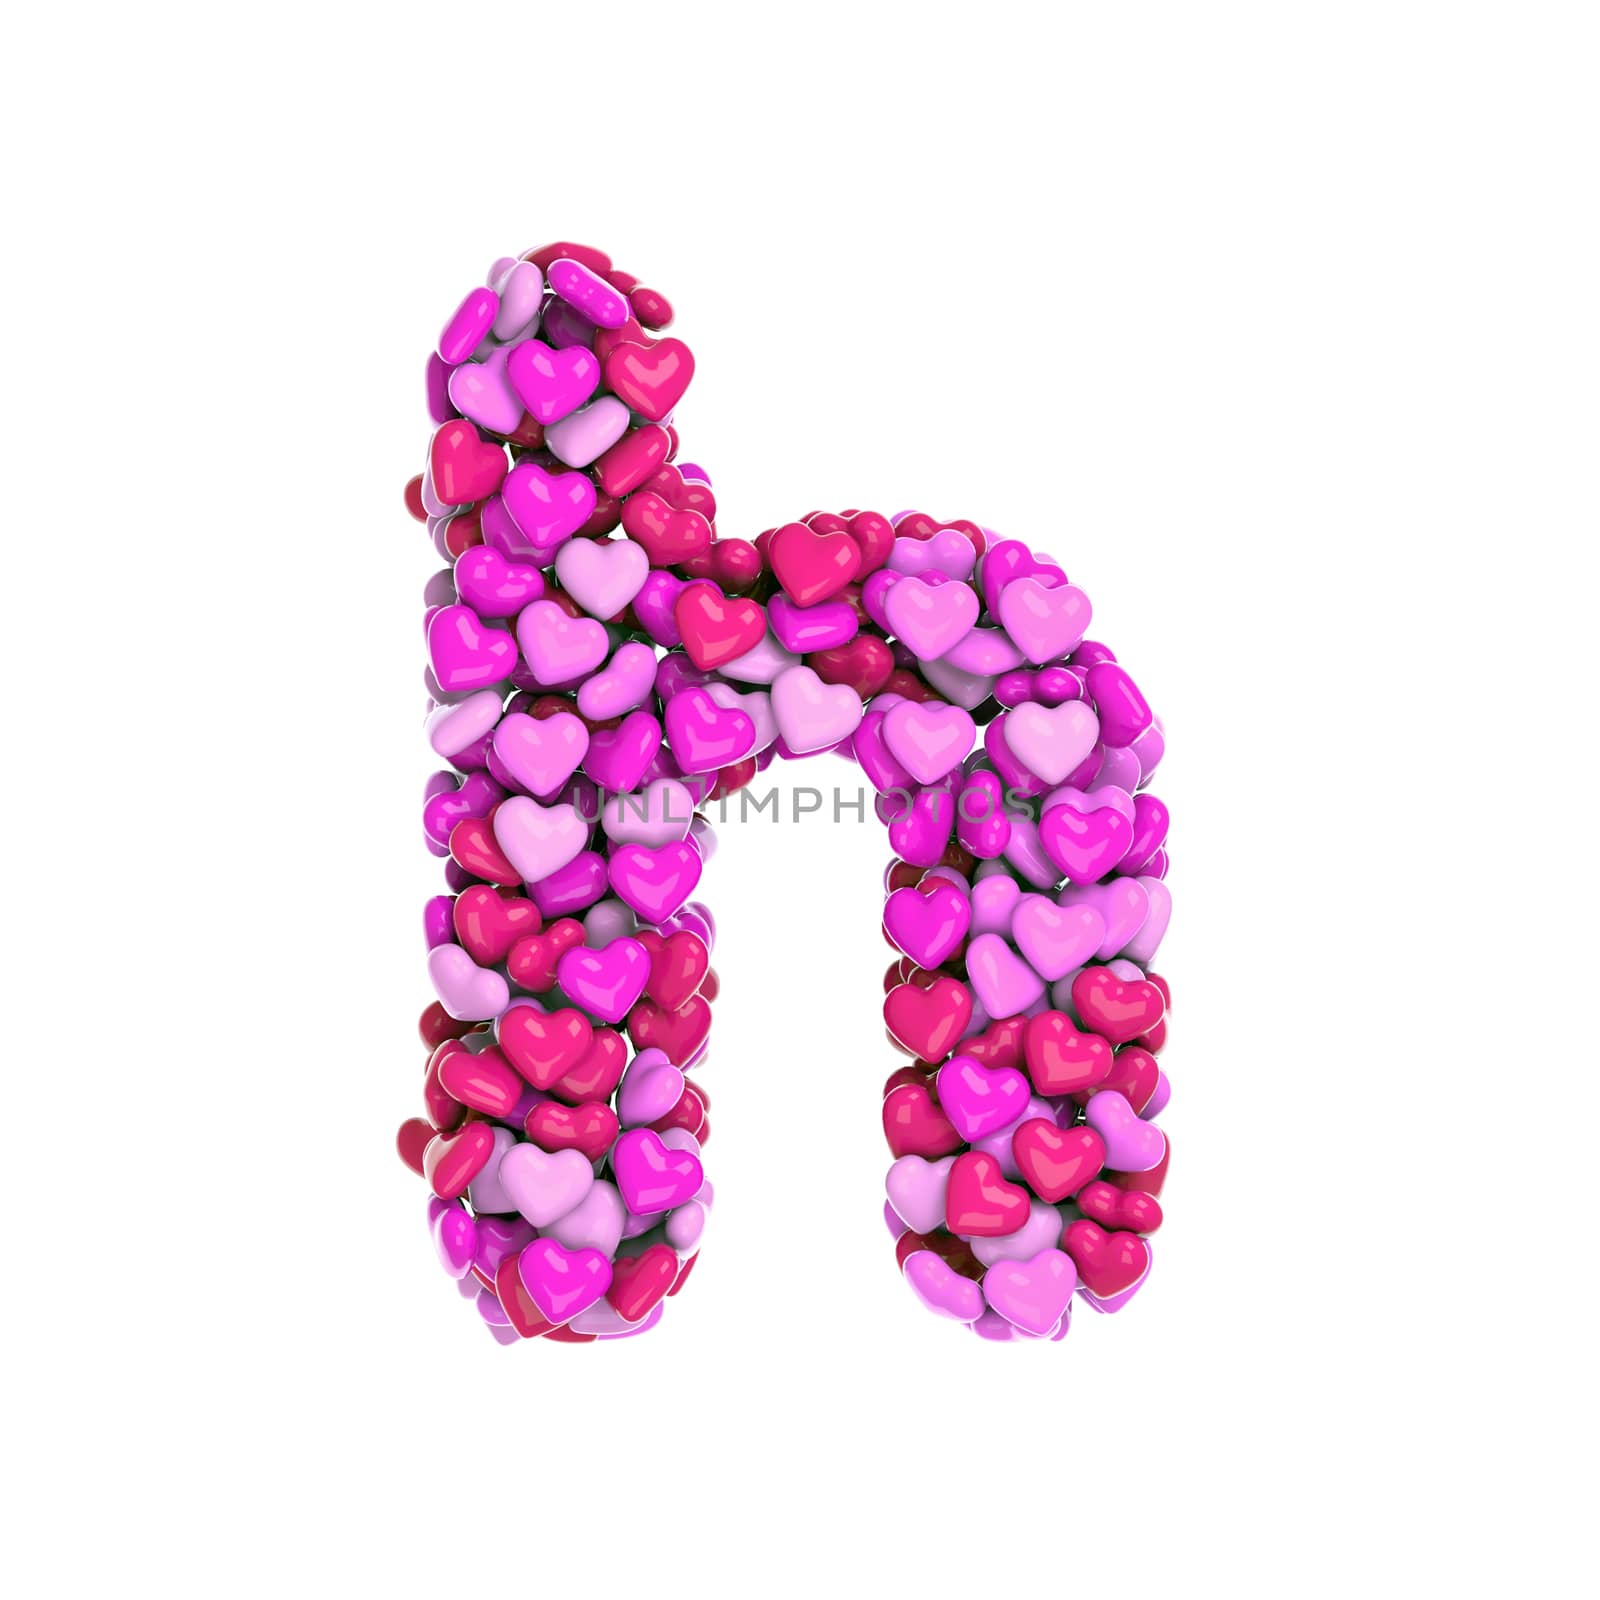 Valentine letter H - Lower-case 3d pink hearts font - Love, passion or wedding concept by chrisroll